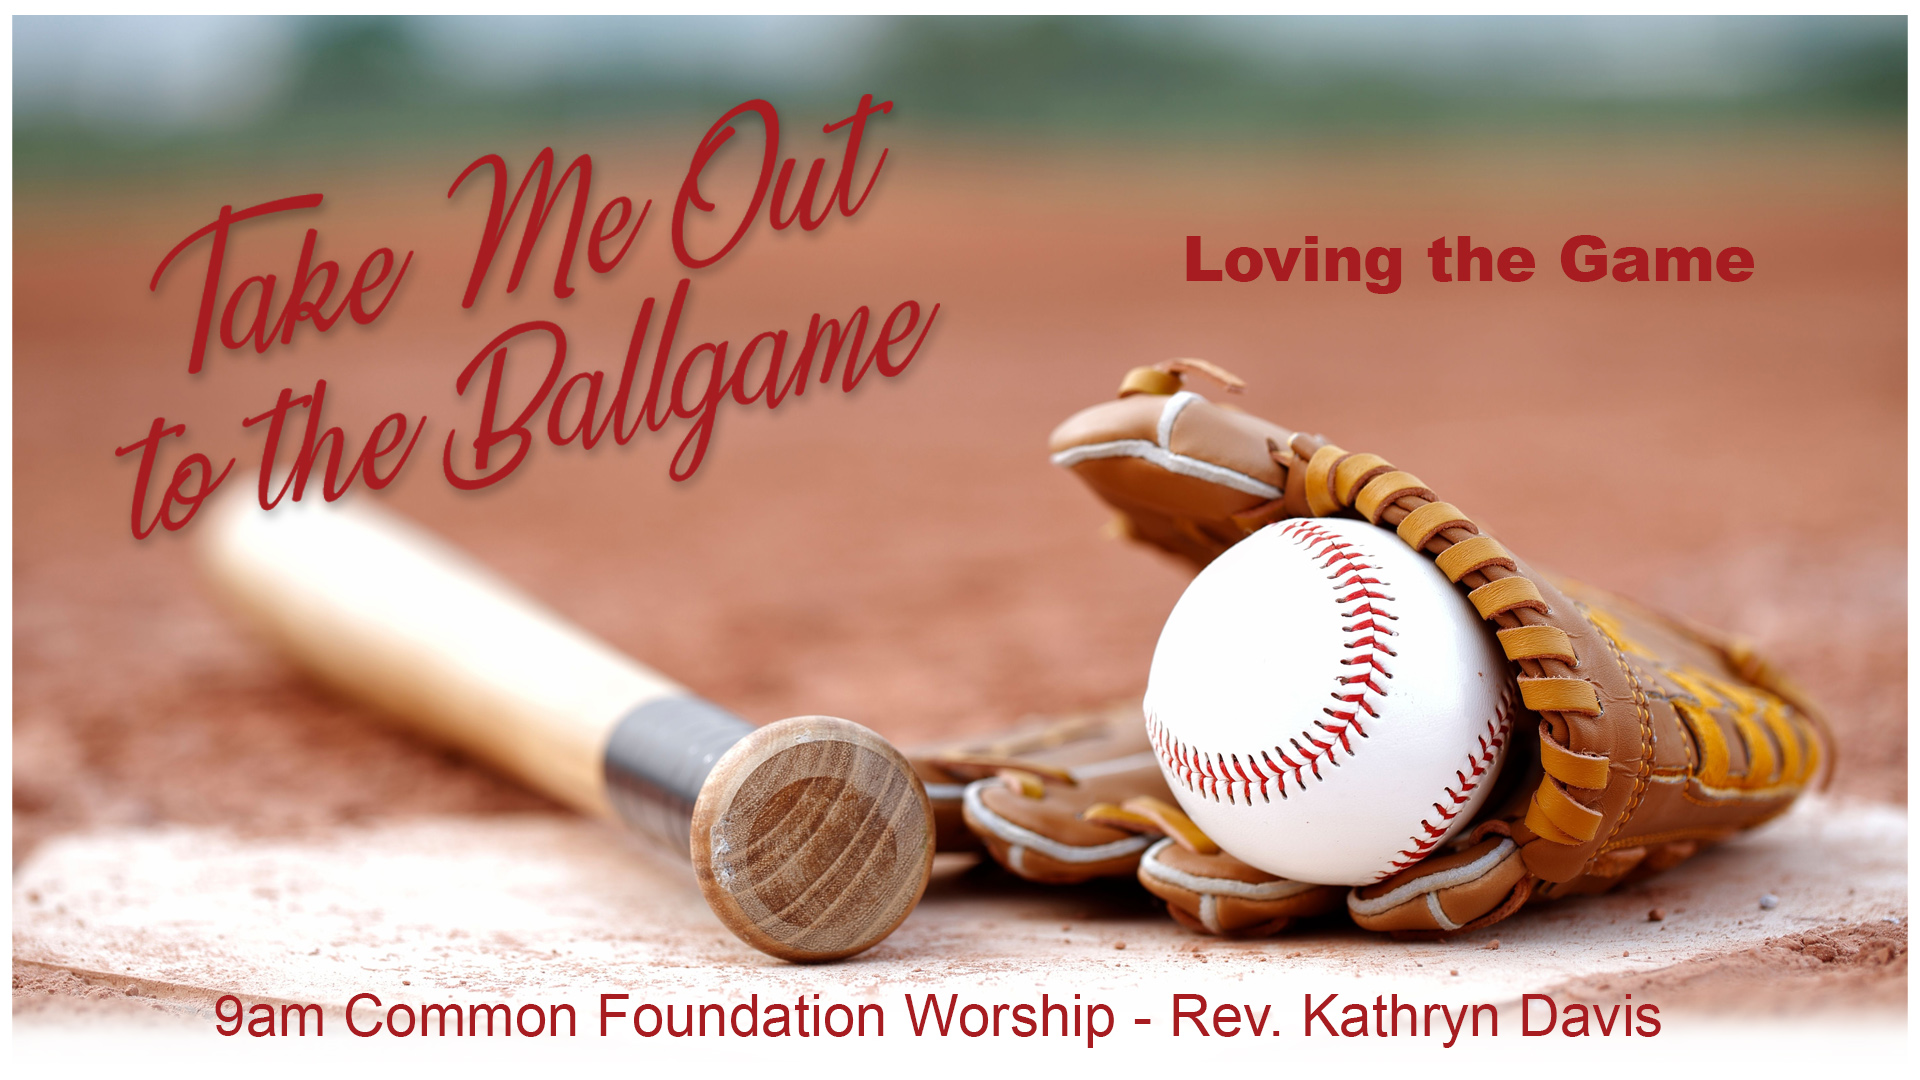 Take Me Out to the Ballgame: Loving the Game (Common Foundation)